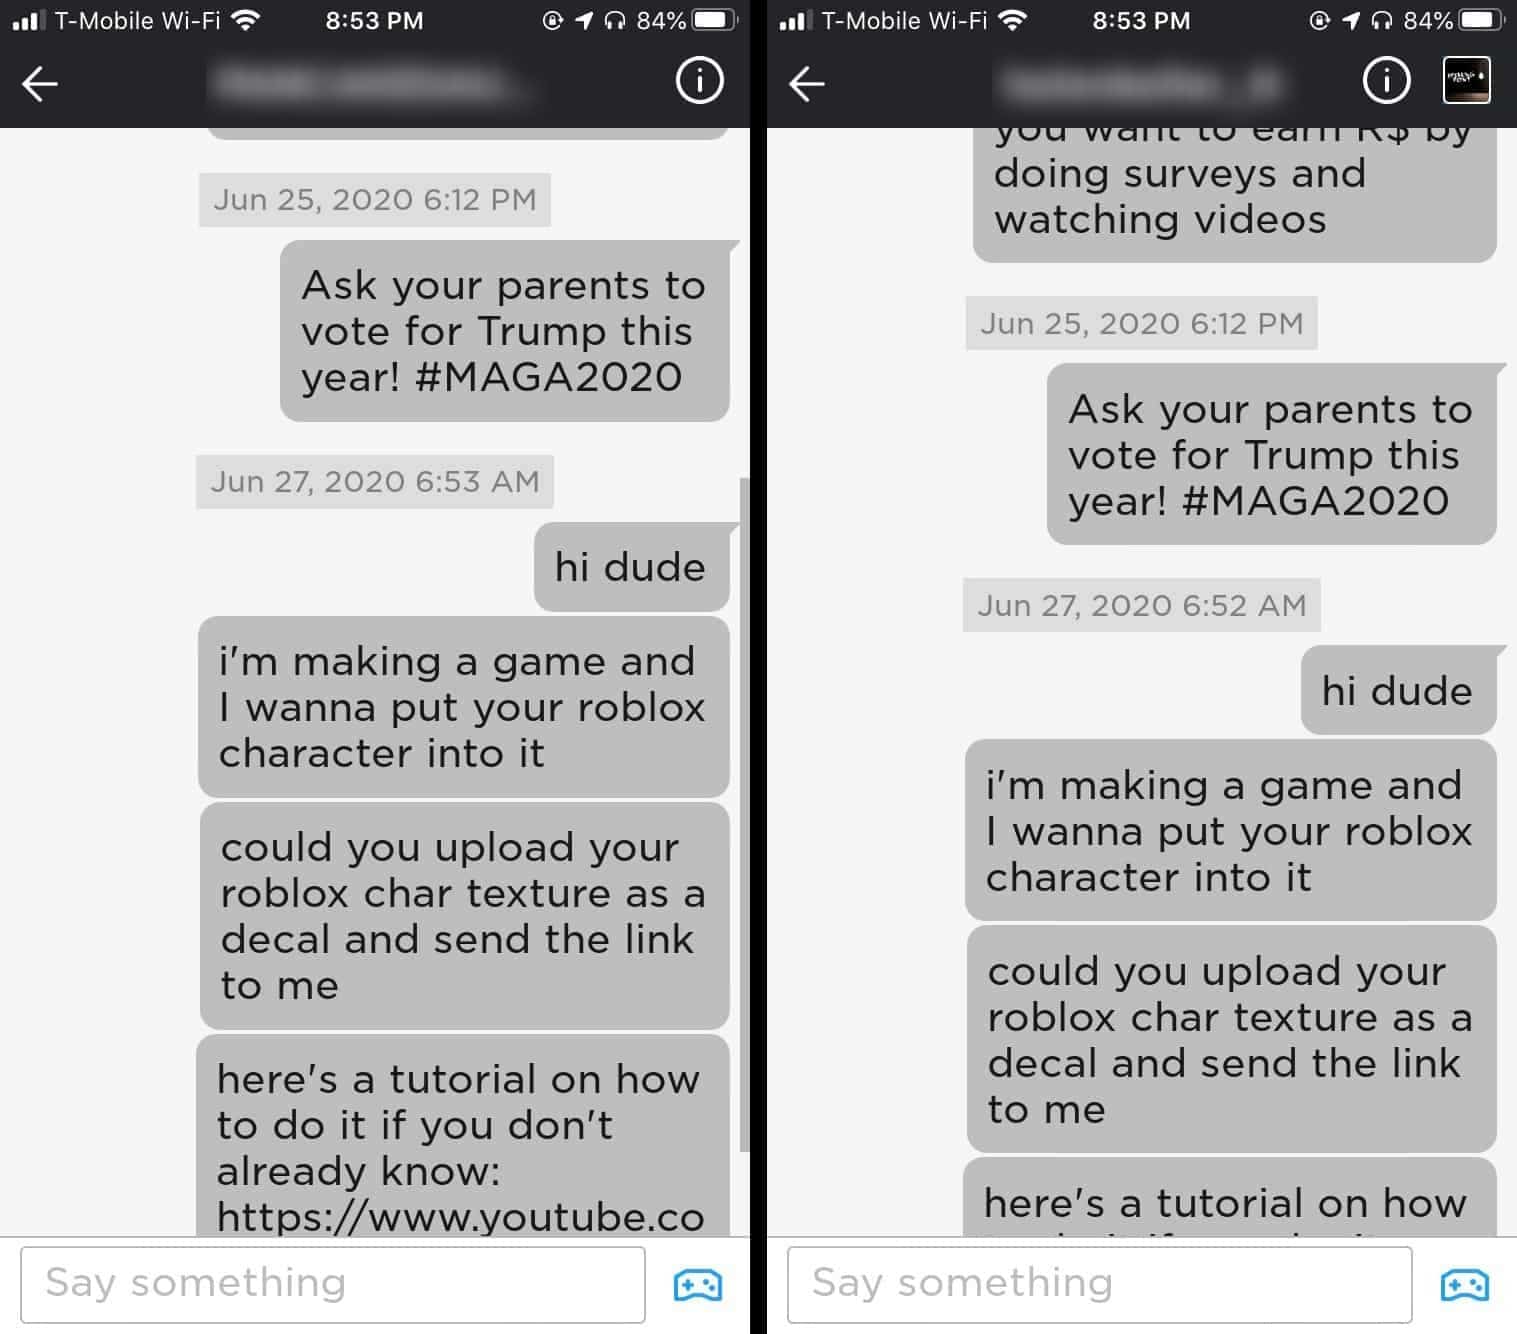 Hackers Deface Roblox Accounts With Pro Trump Messages